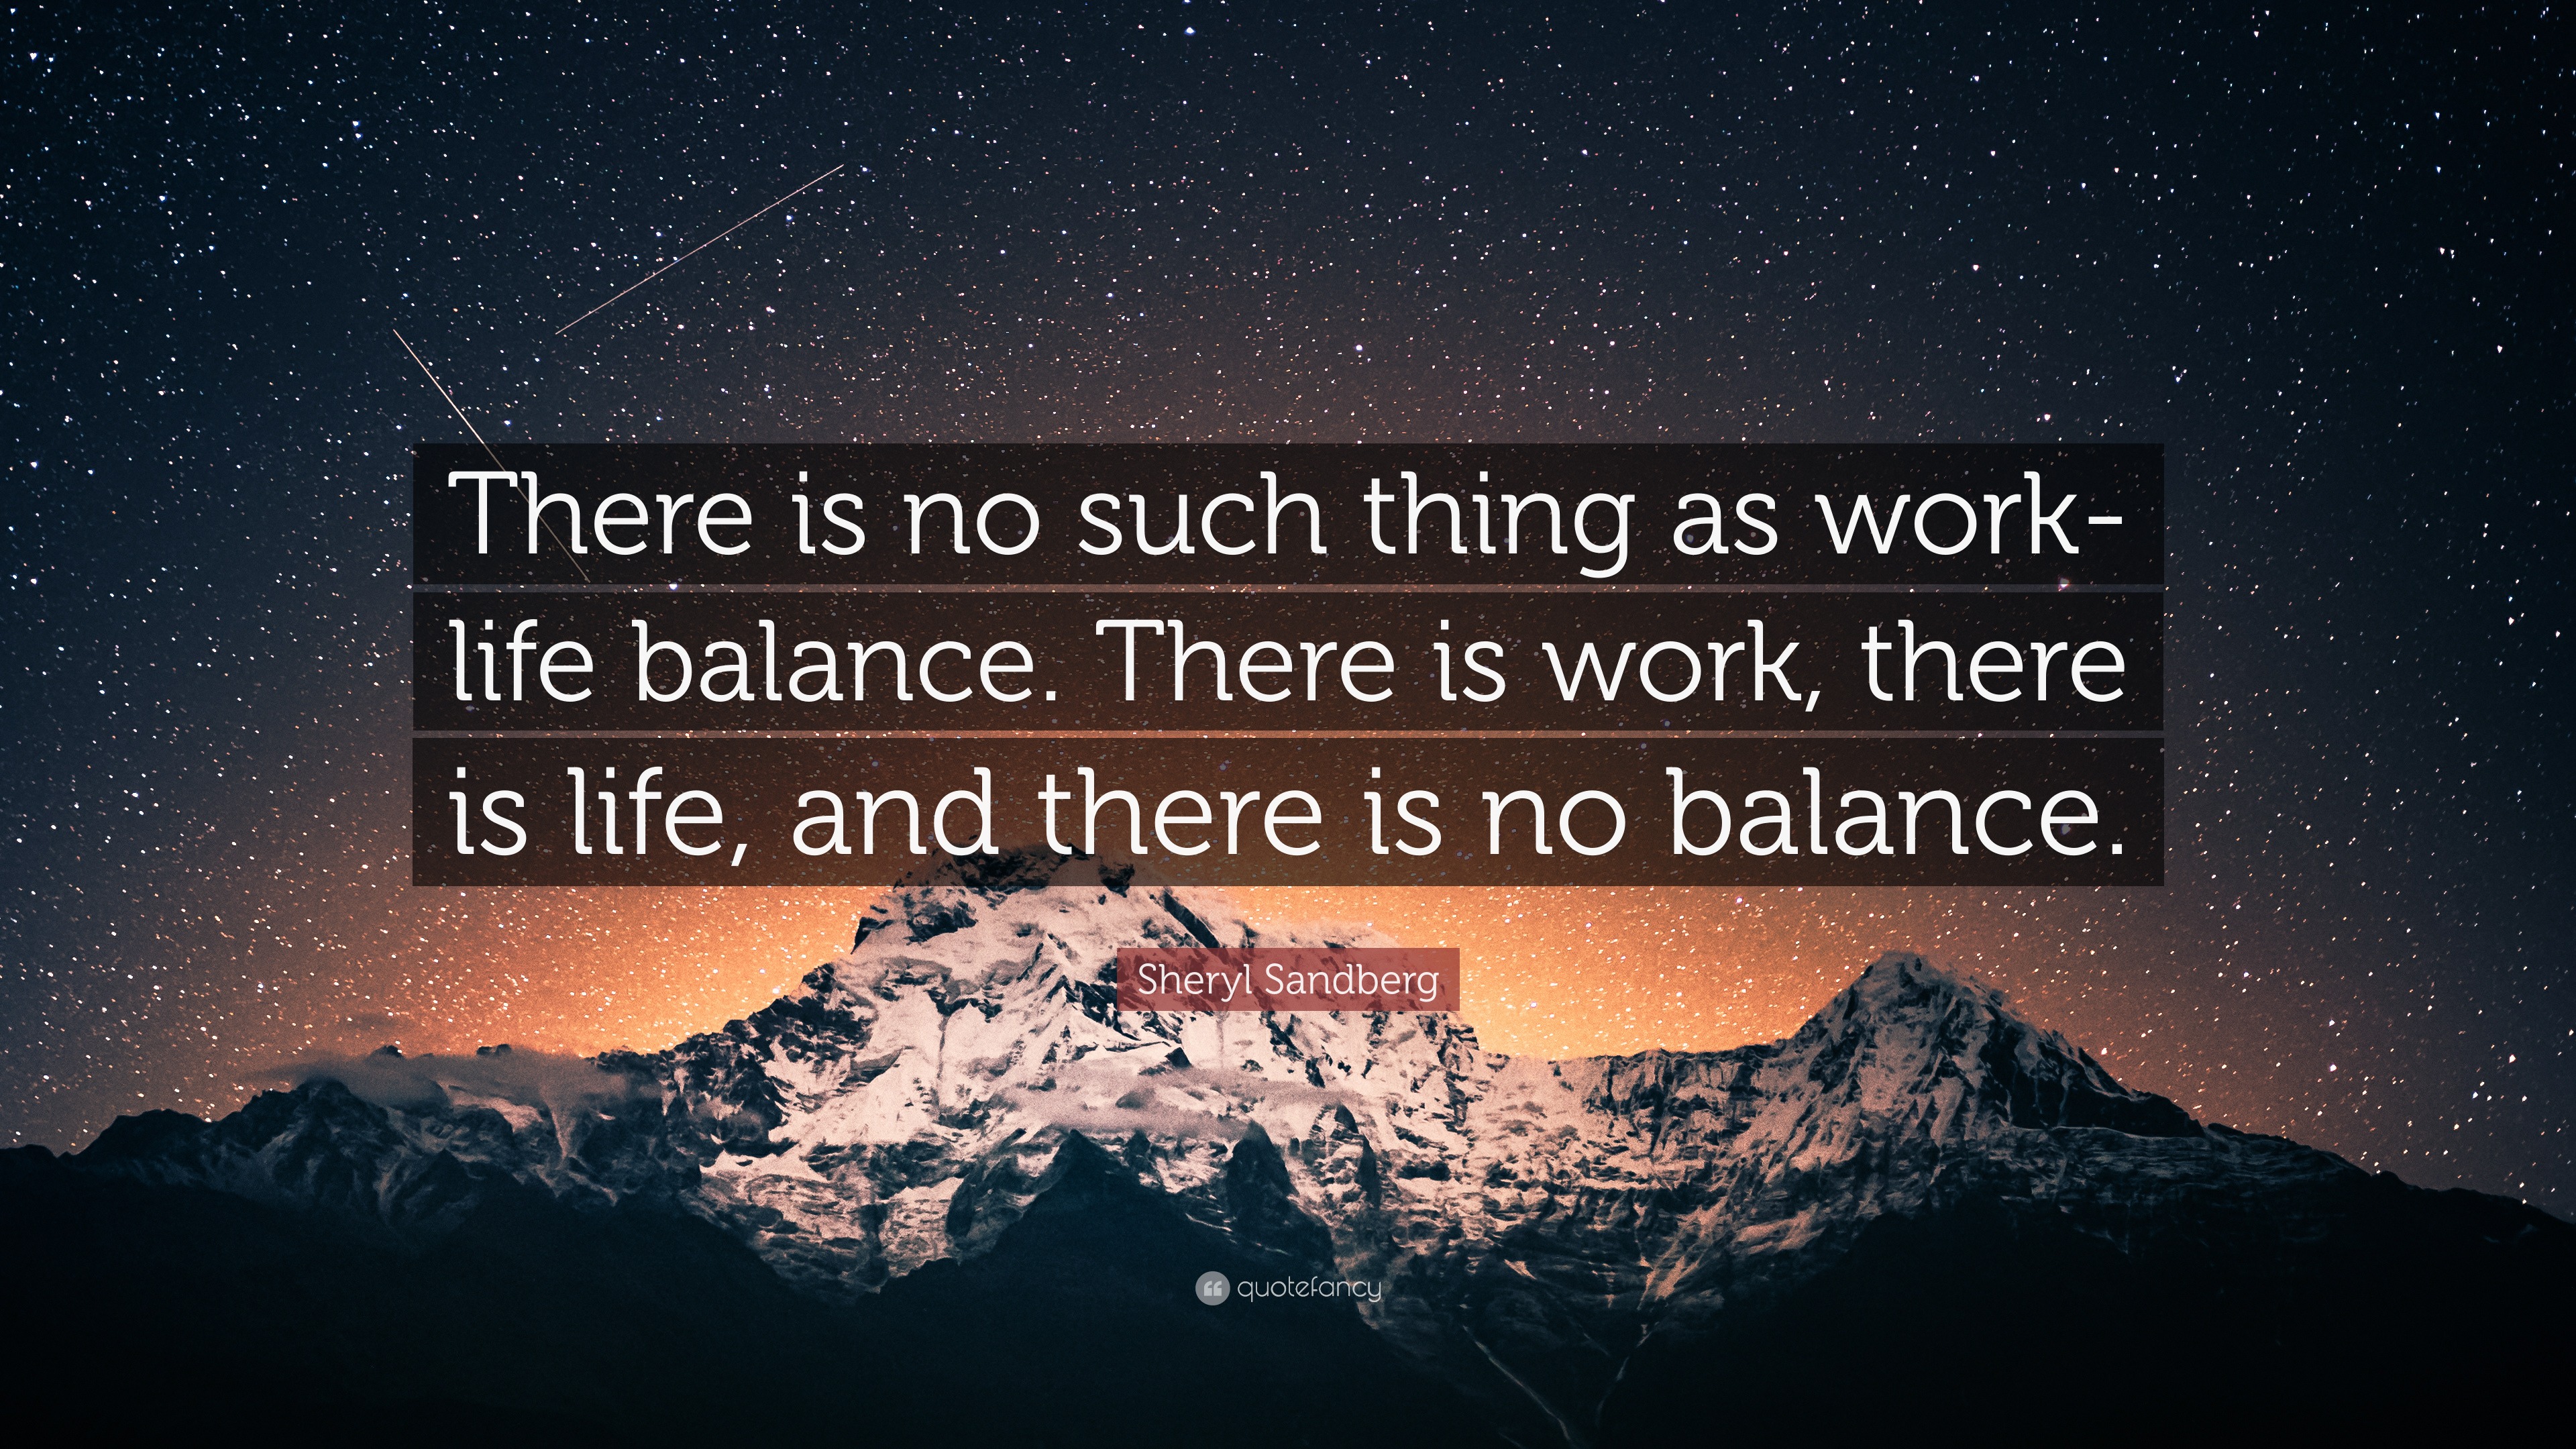 Sheryl Sandberg Quote: “There is no such thing as work-life balance